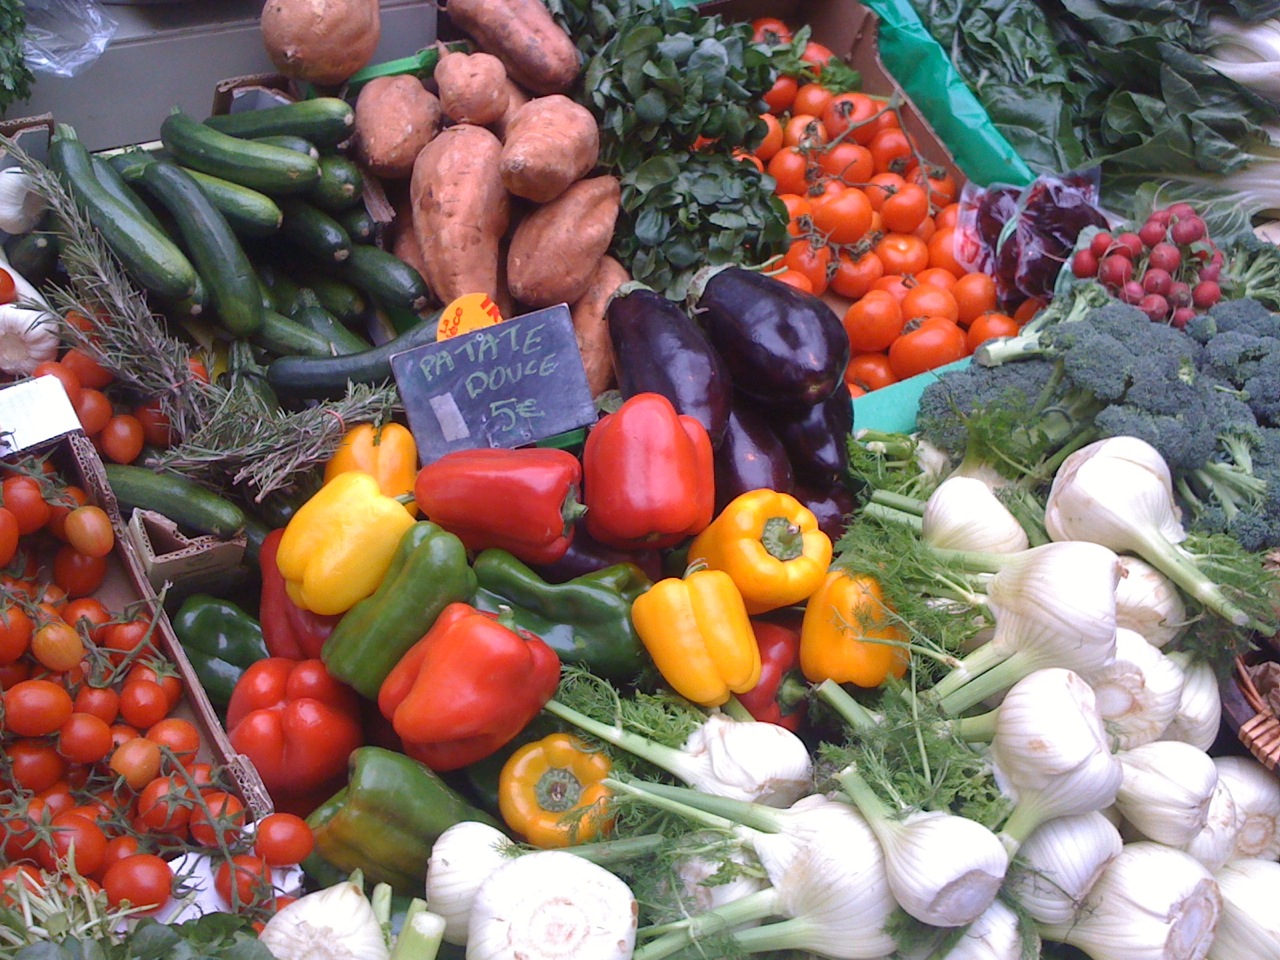 a display in a store with several types of vegetables